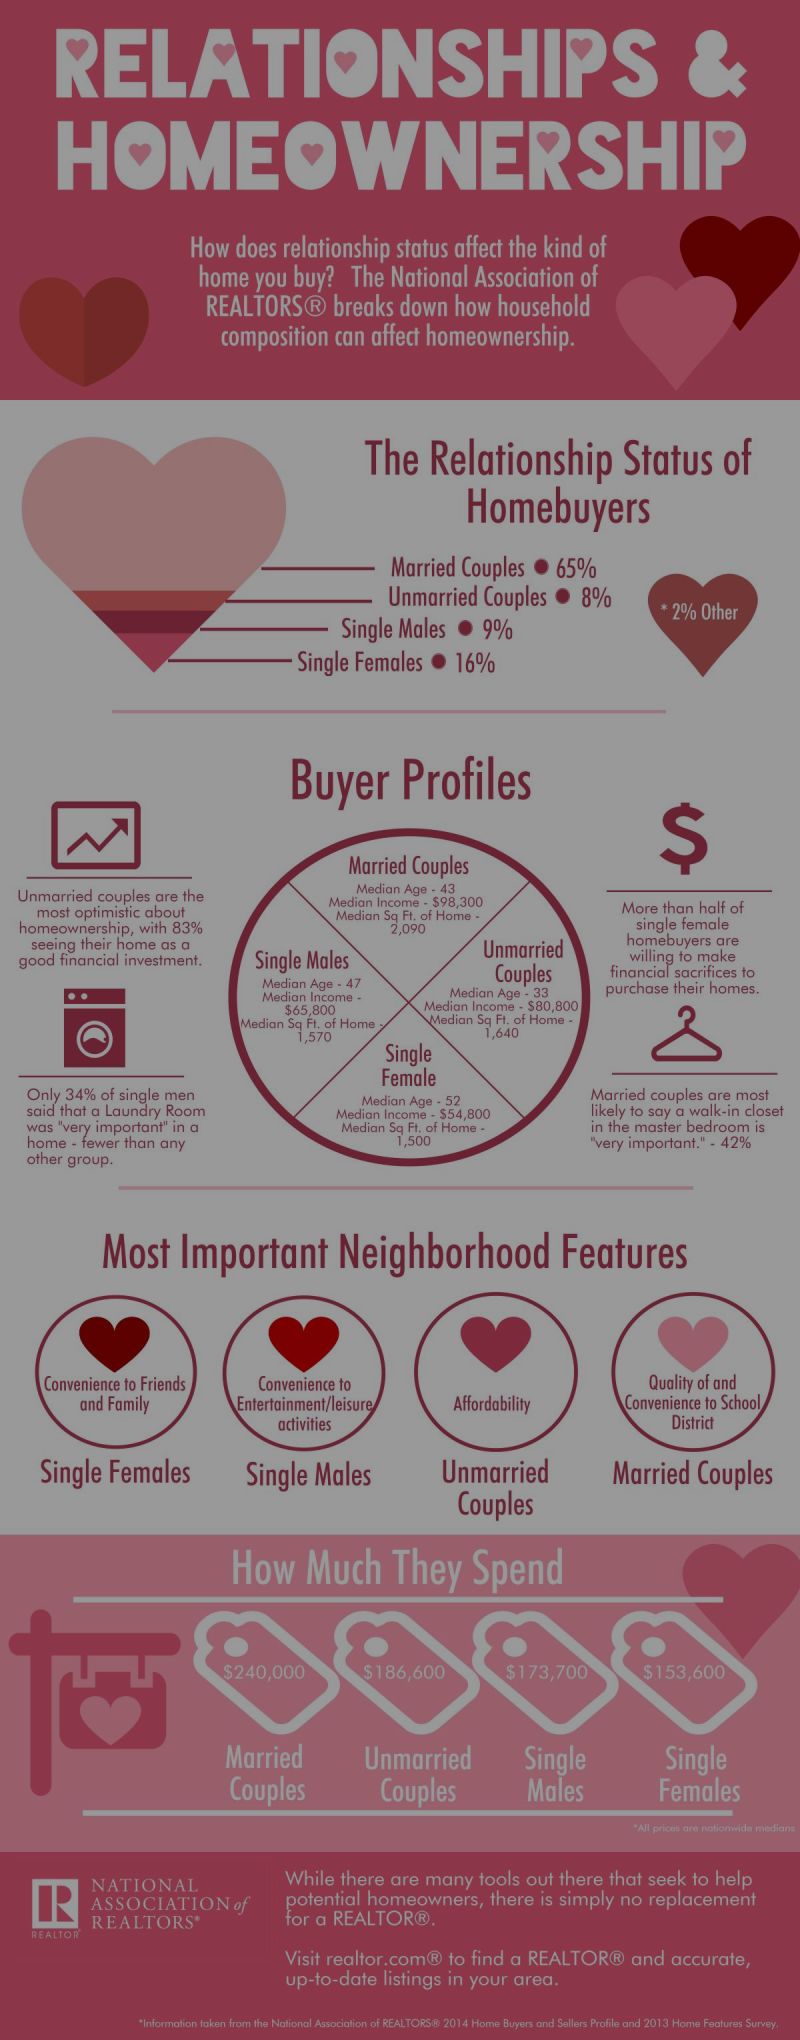 Does your relationship status affect the kind of home you buy?